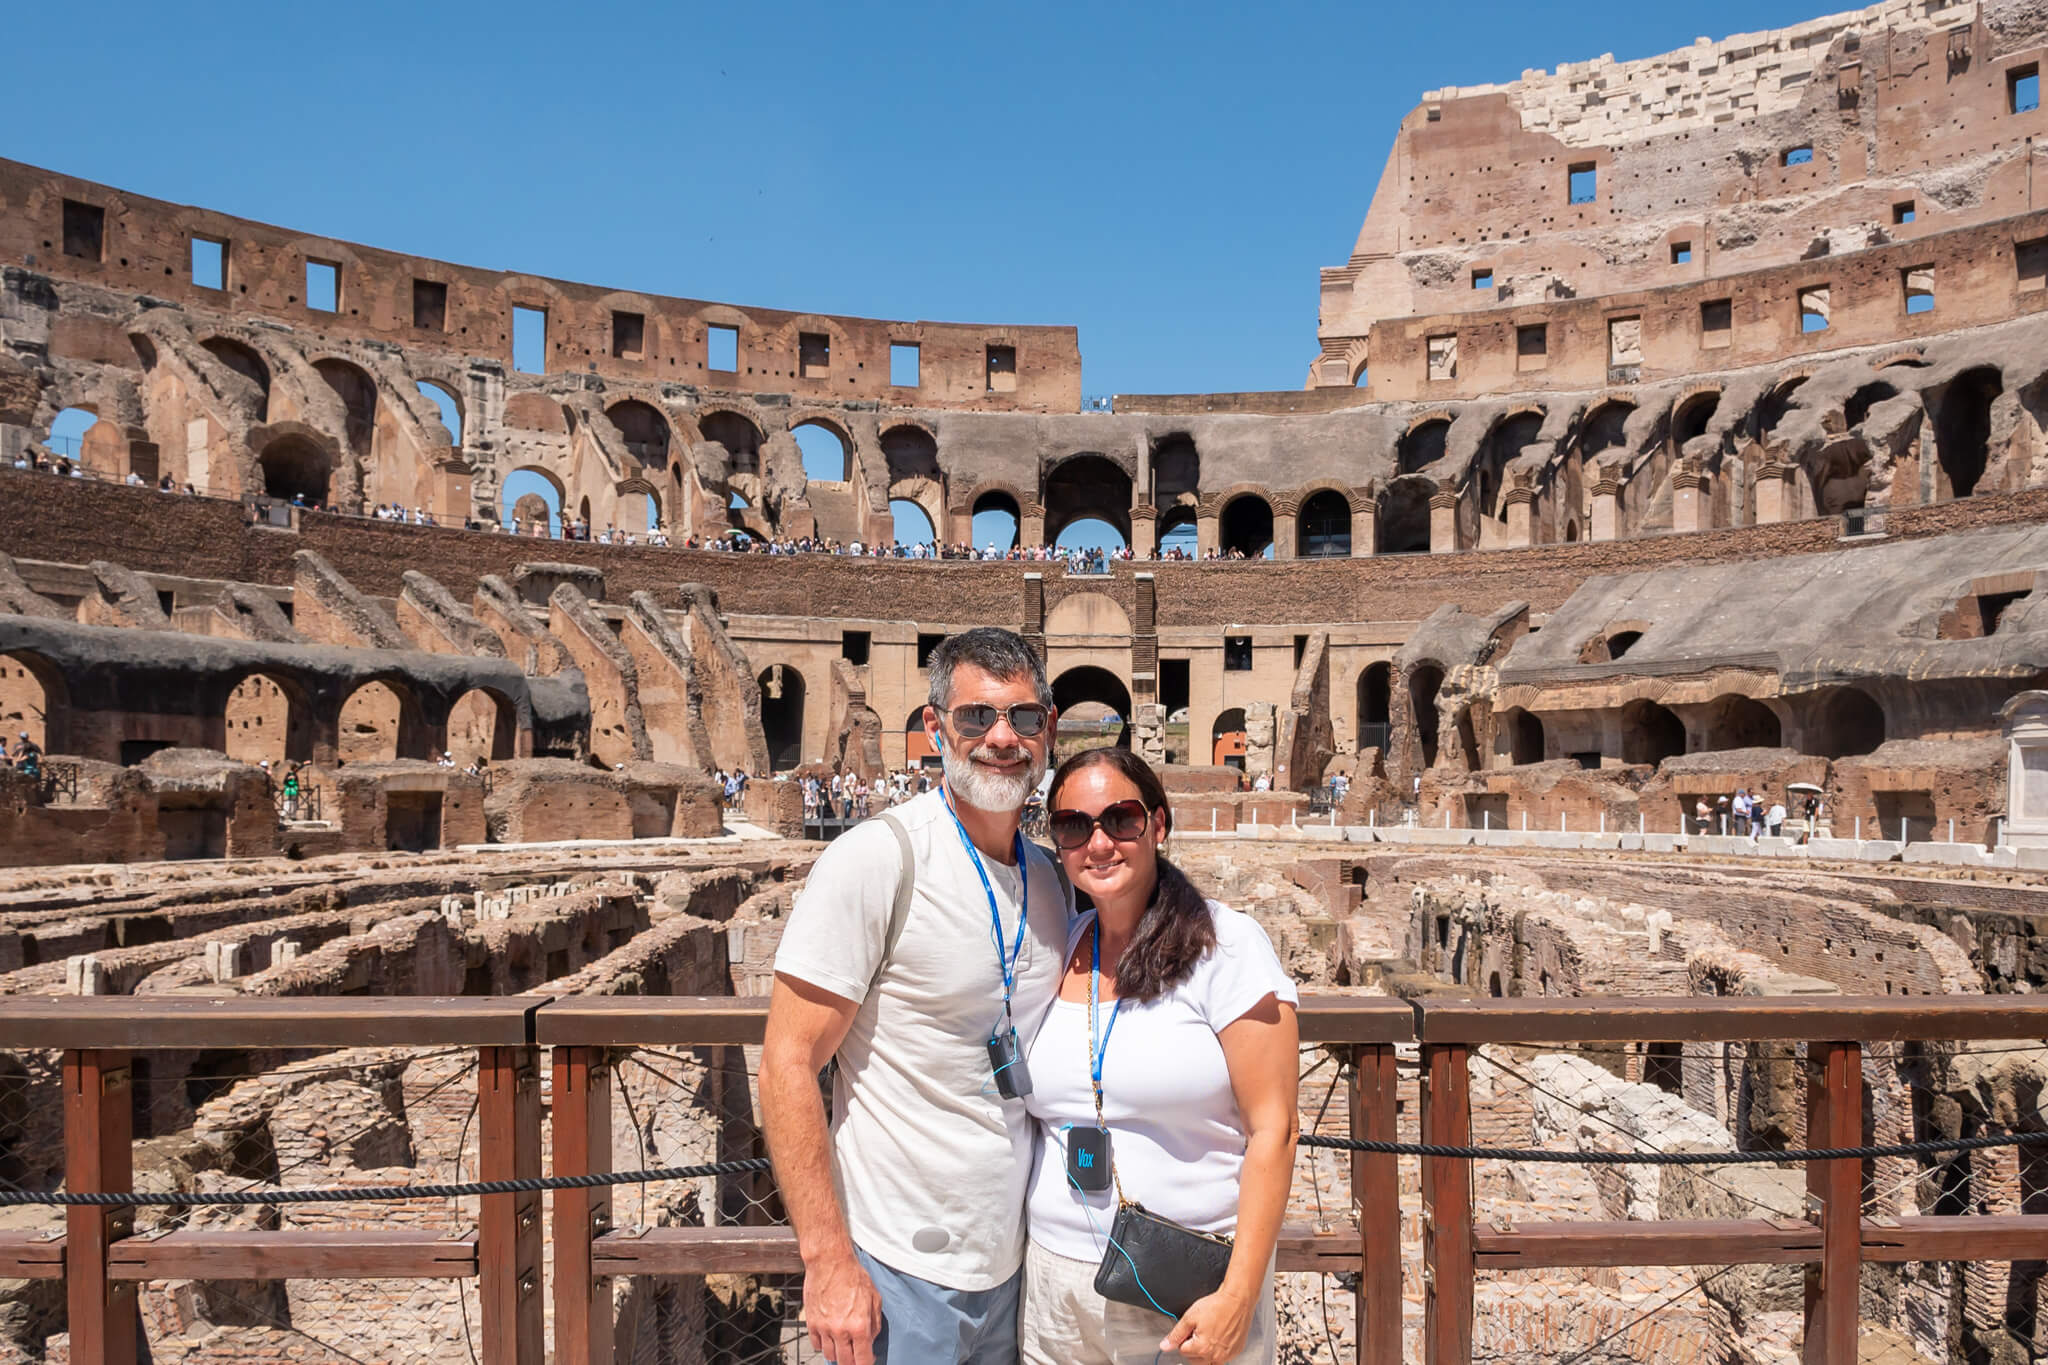 A husband and wife at the Colosseum